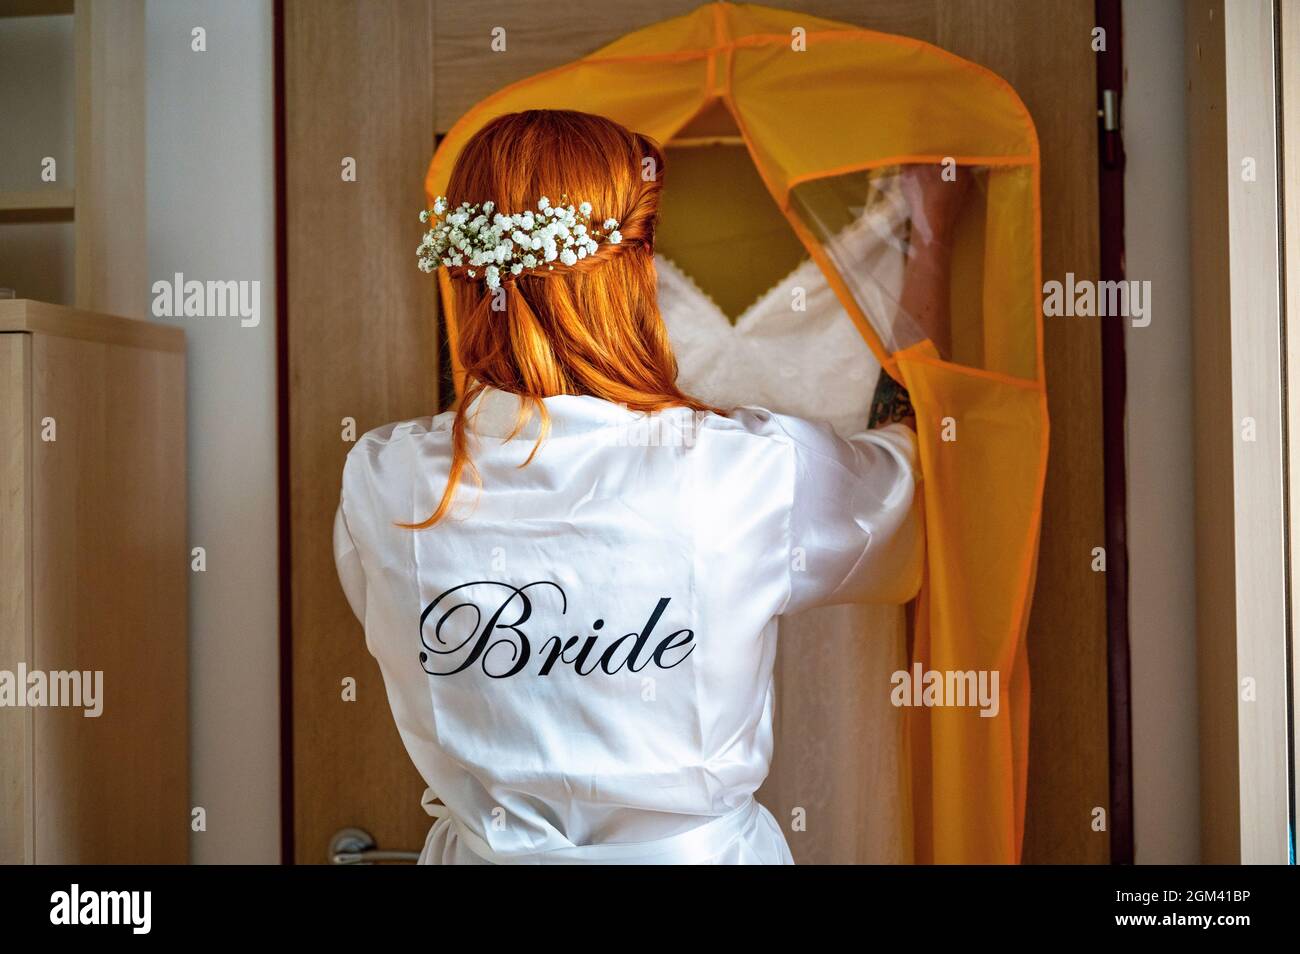 Red-haired women with wreath of flowers in white satin robe with inscription 'bride' takes off wedding dress from hanger. Bride preparing on wedding d Stock Photo